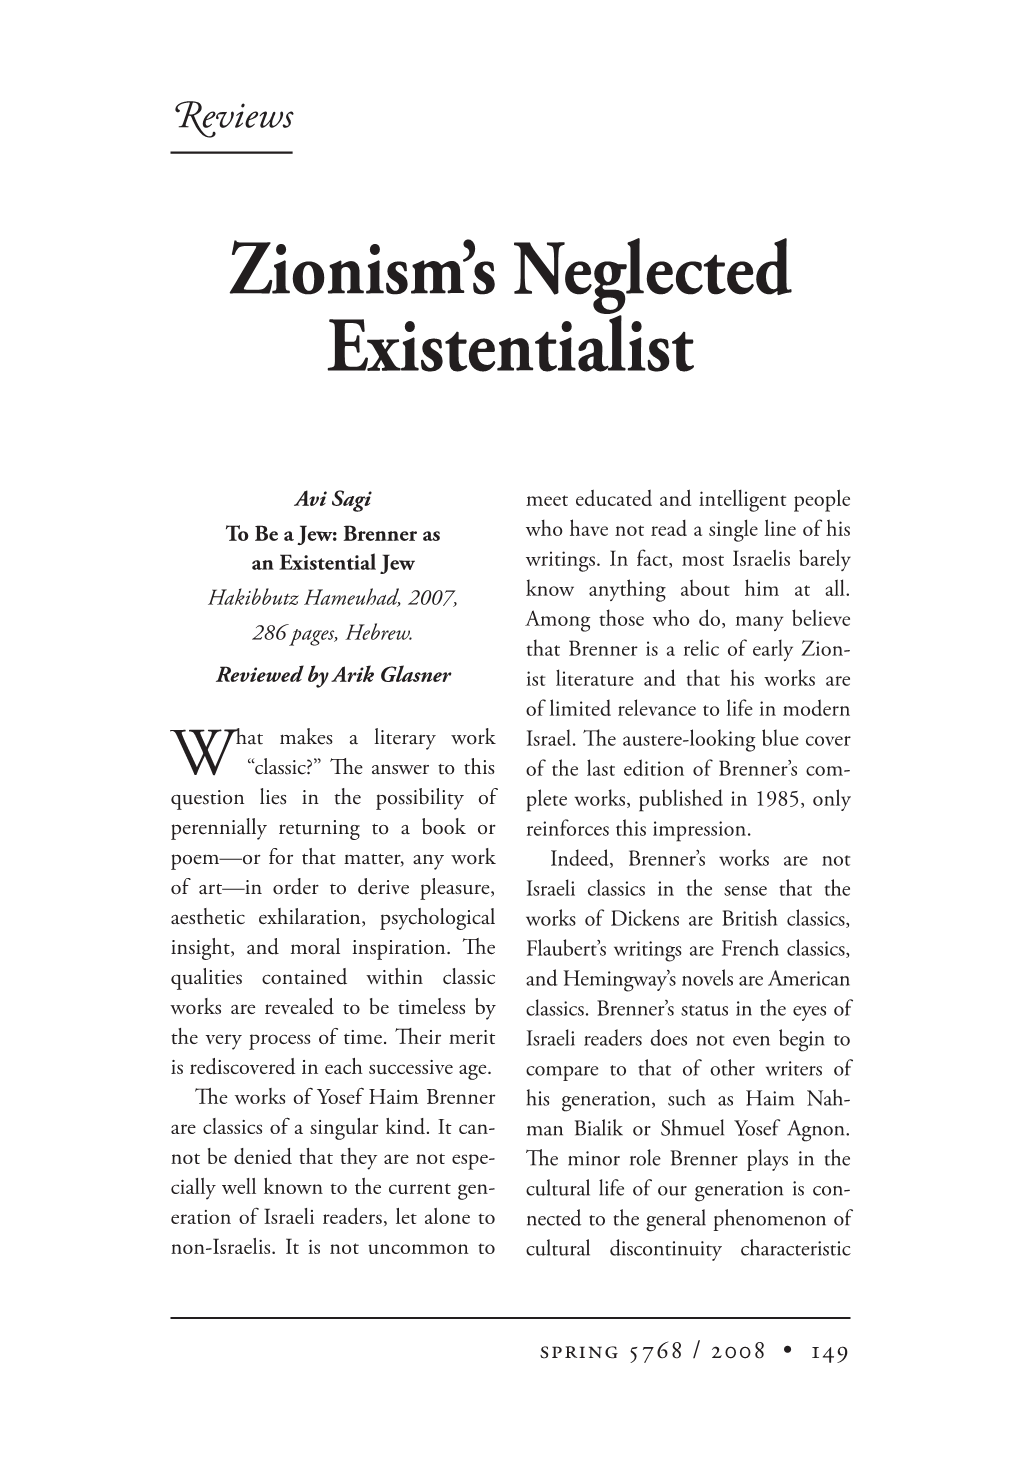 Zionism's Neglected Existentialist